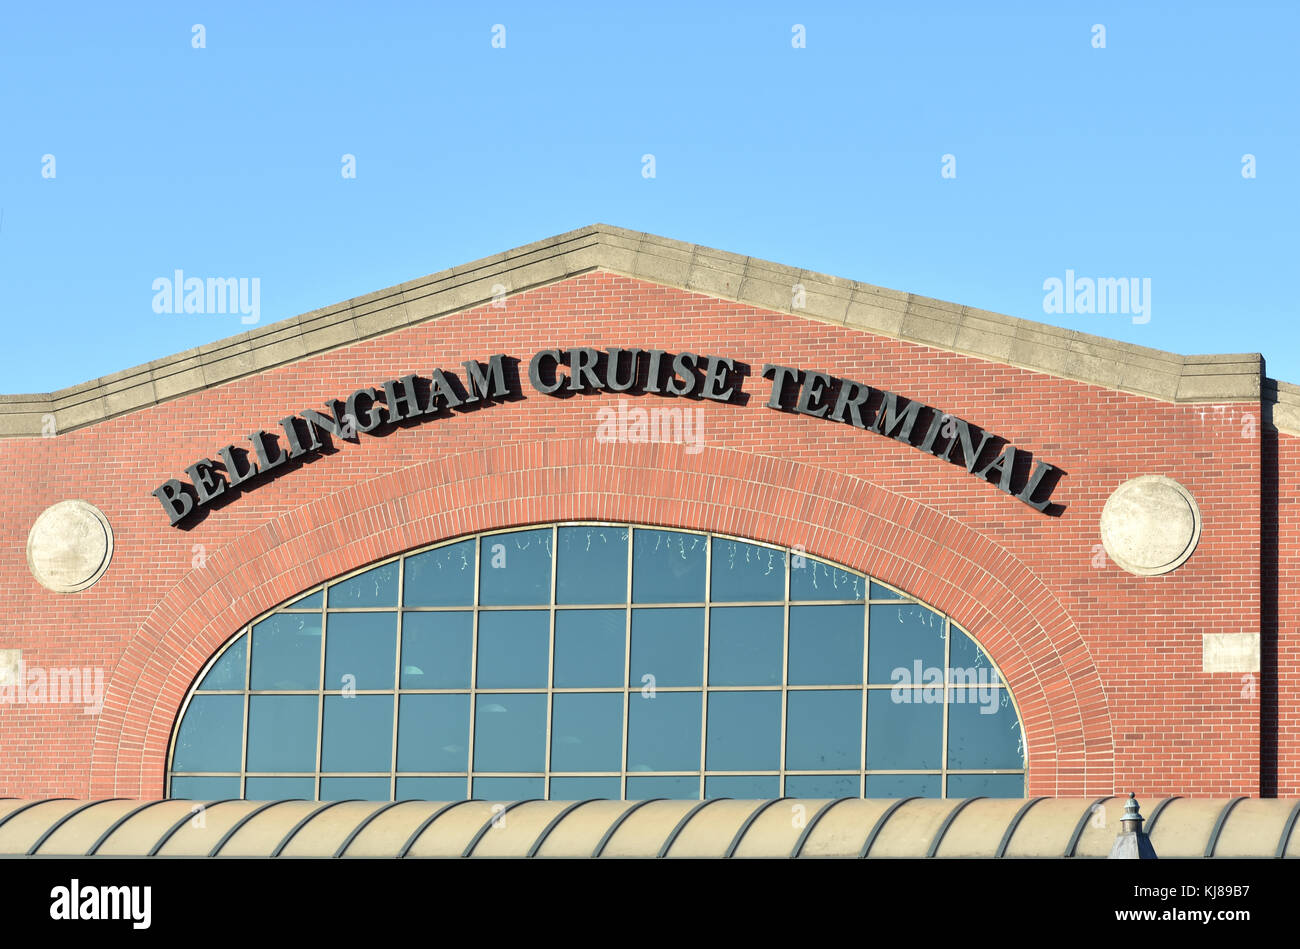 Bellingham Cruise Terminal in Washington State.  The cruise terminal has ferrys to Alaska and Friday Harbor. Stock Photo